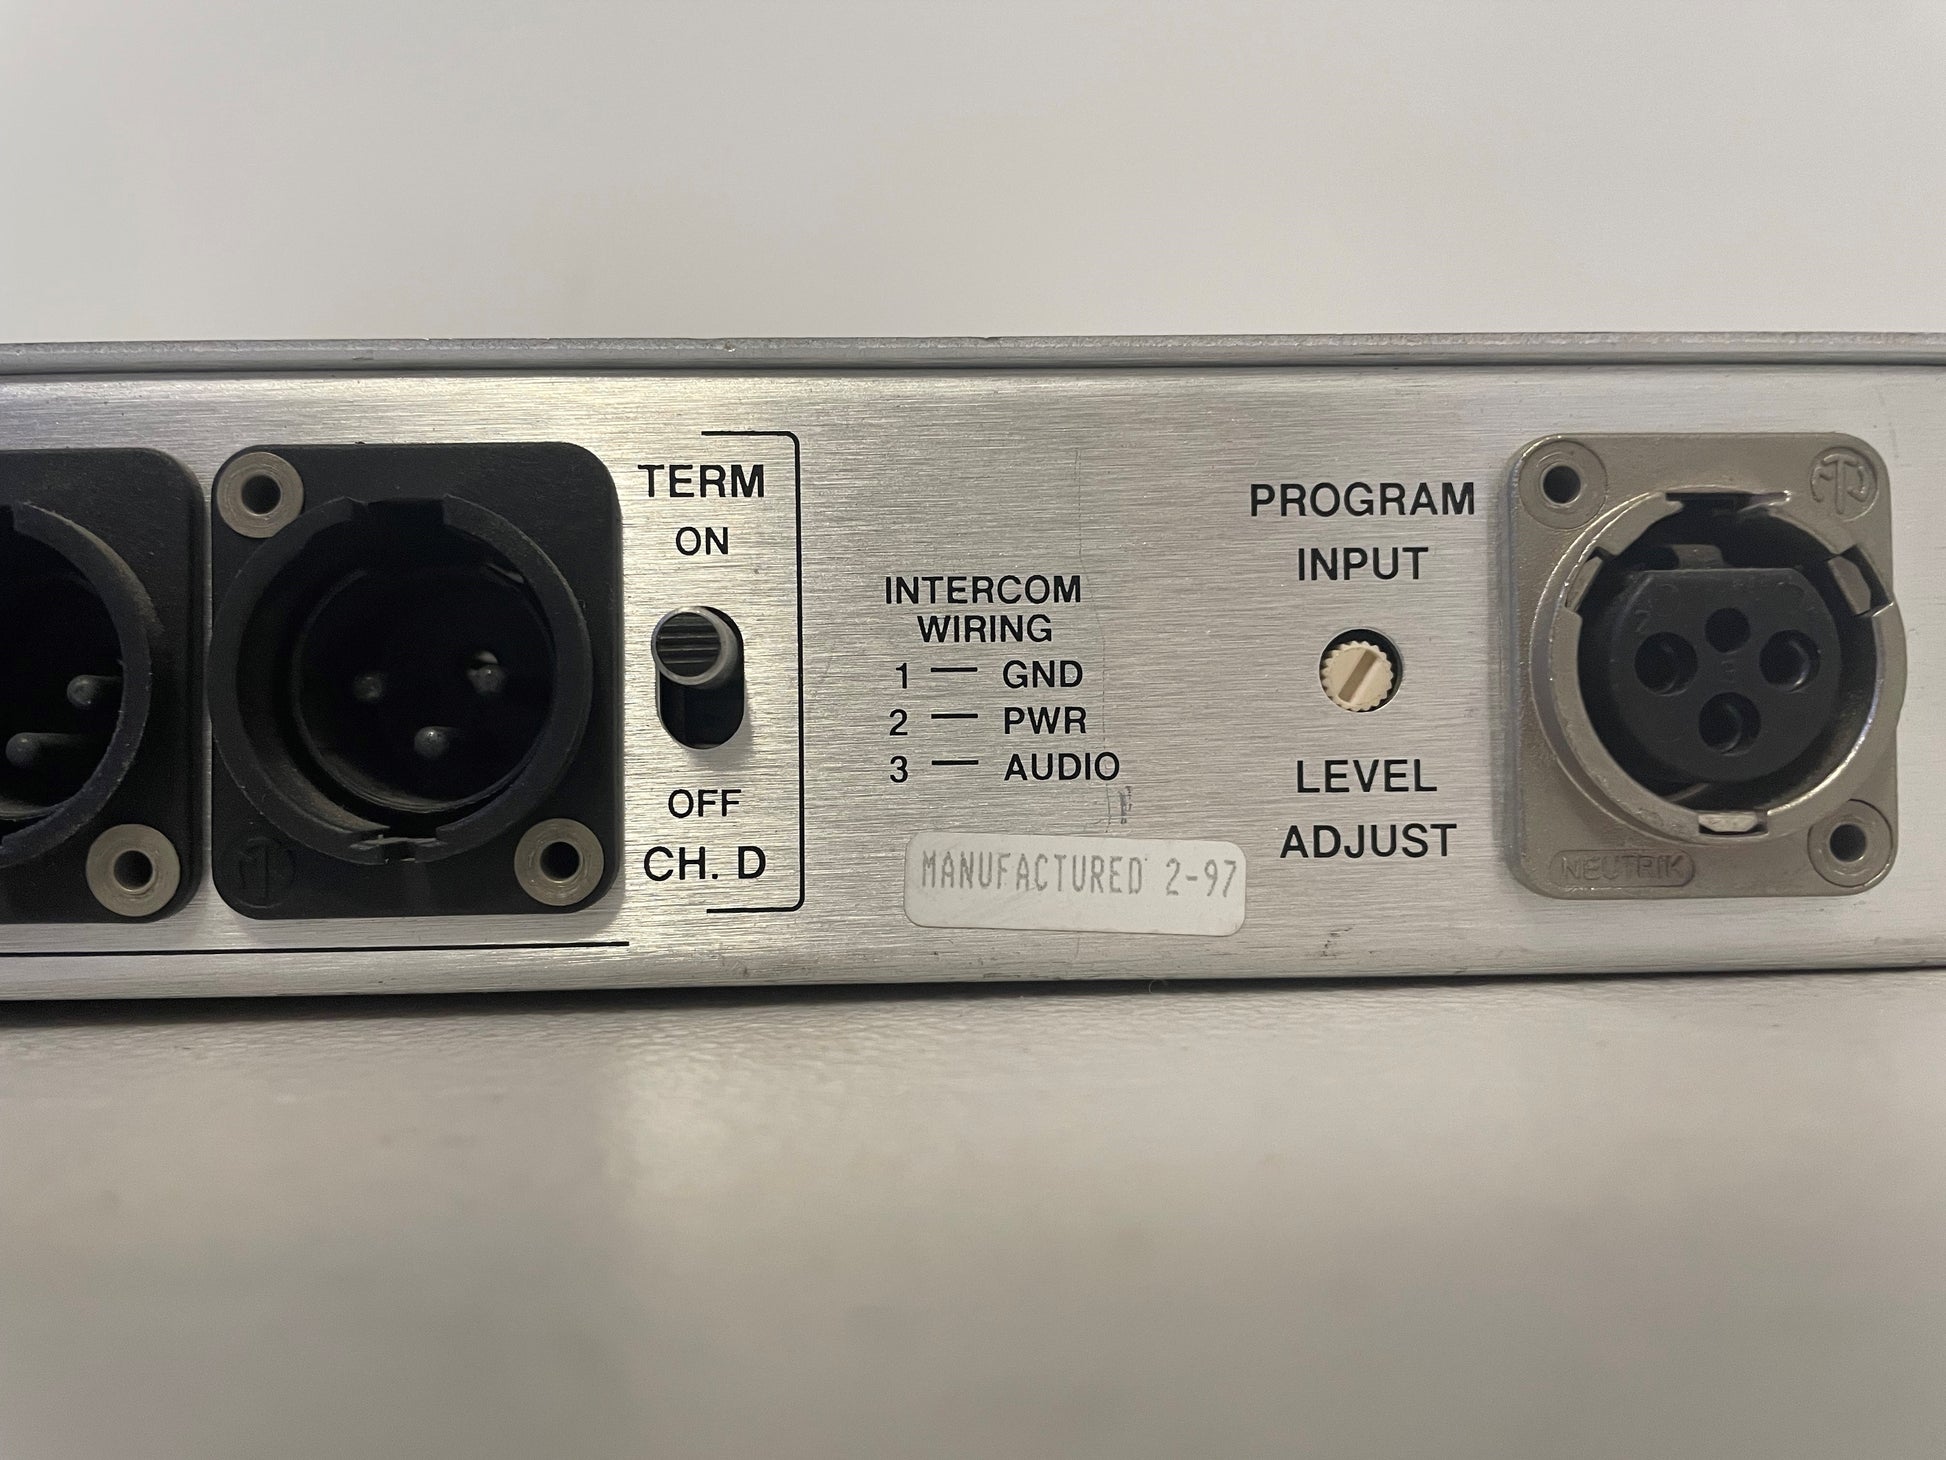 Used Clear-Com PL Pro PS-464, 4Ch Power Supply for Sale. We Sell Professional Audio Equipment. Audio Systems, Amplifiers, Consoles, Mixers, Electronics, Entertainment and Live Sound. 